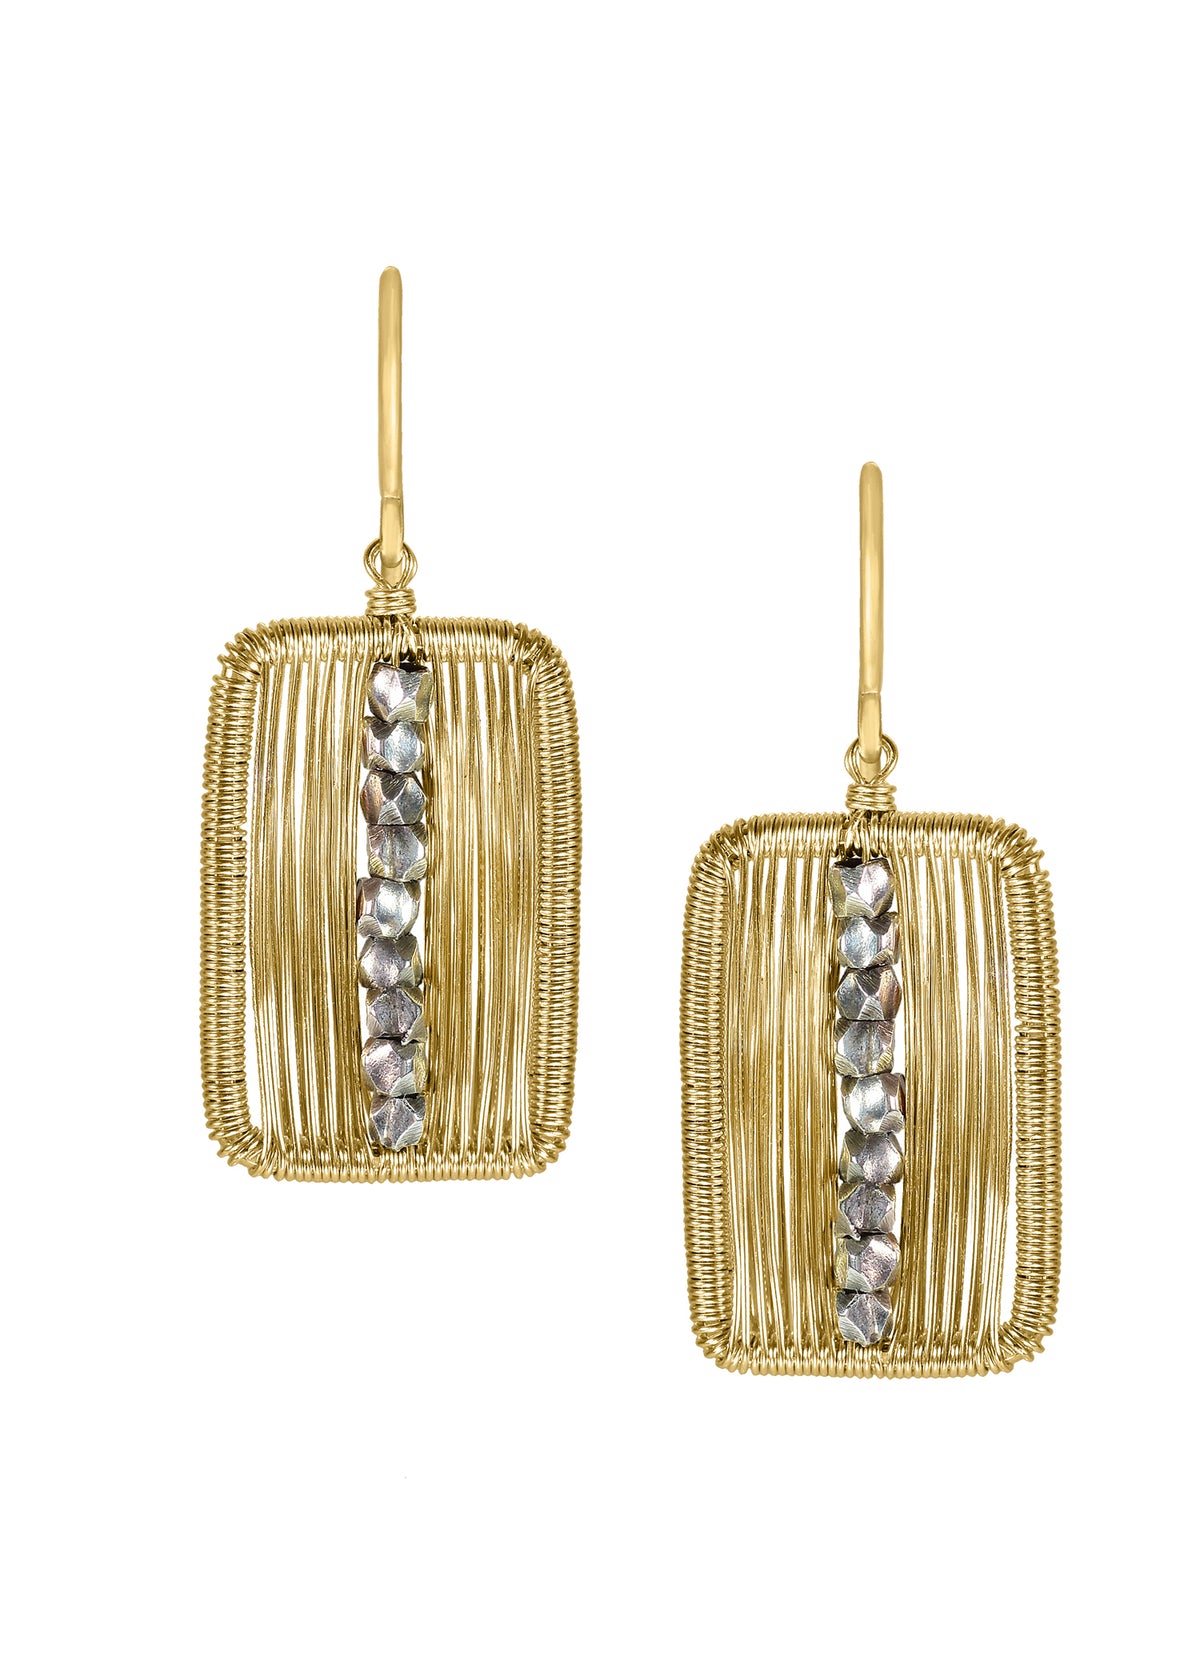 14k gold fill Sterling silver Earrings measure 1-1/4&quot; in length (including the ear wires) and 1/2&quot; in width Handmade in our Los Angeles studio